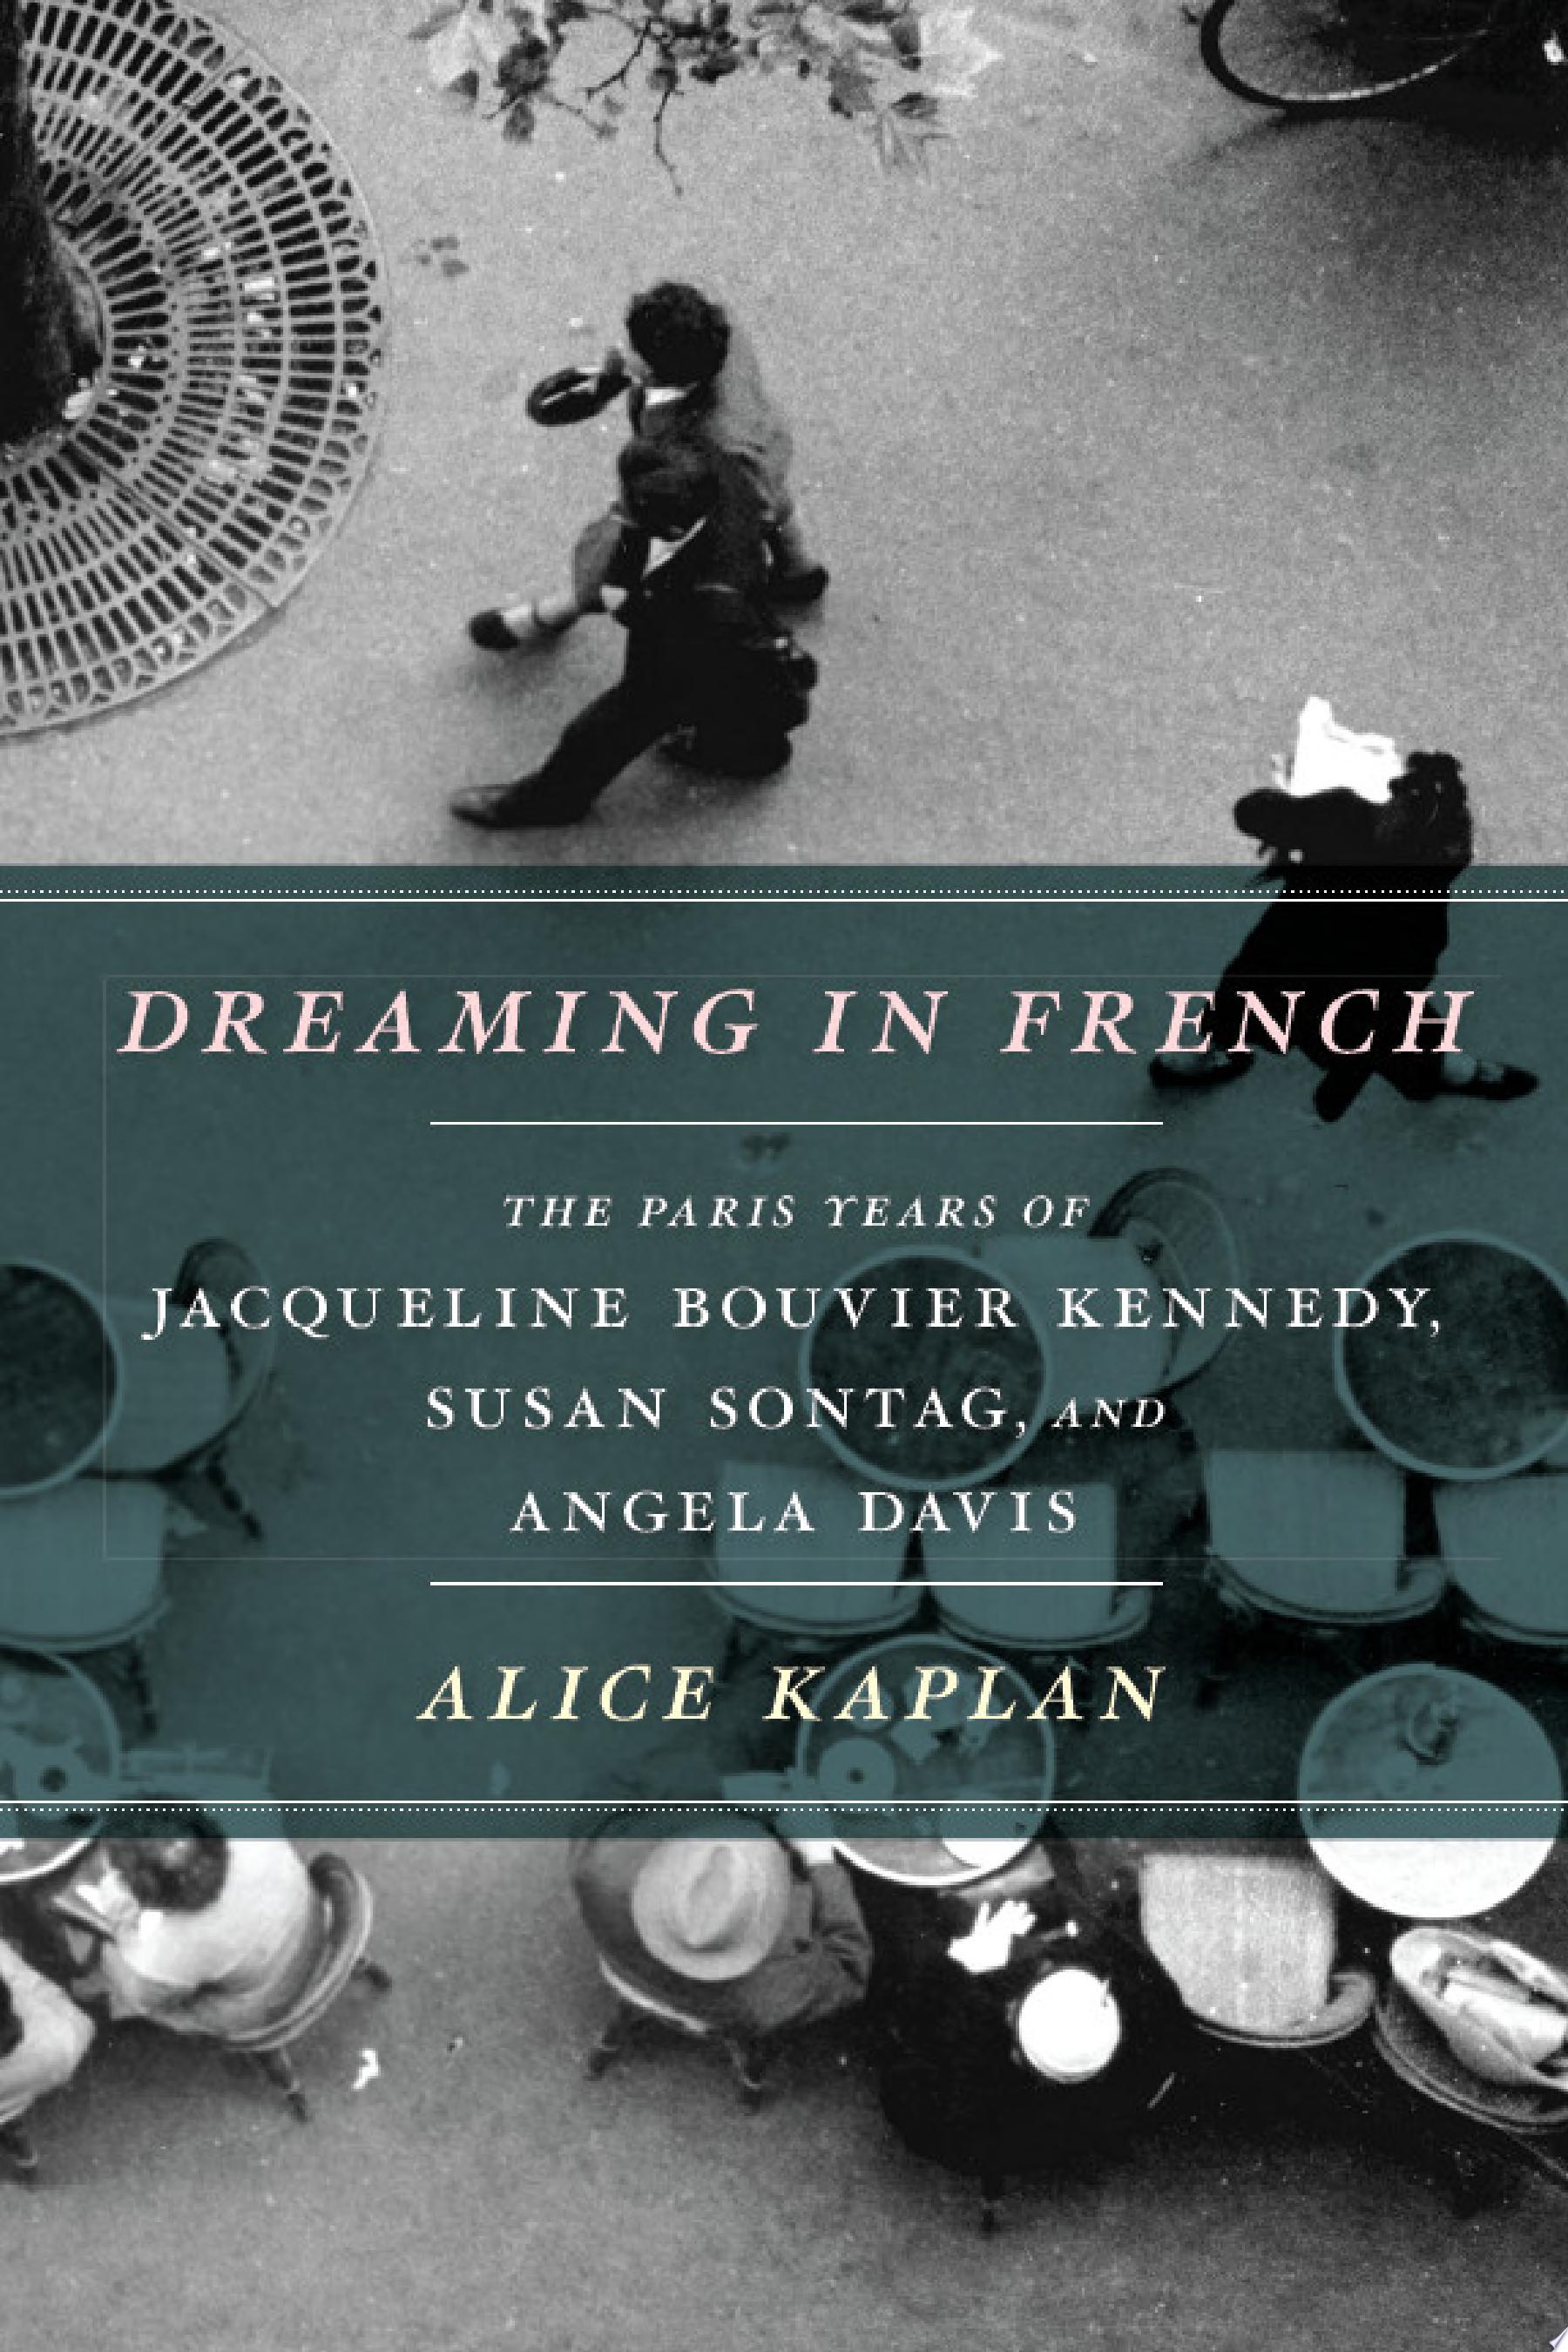 Image for "Dreaming in French"